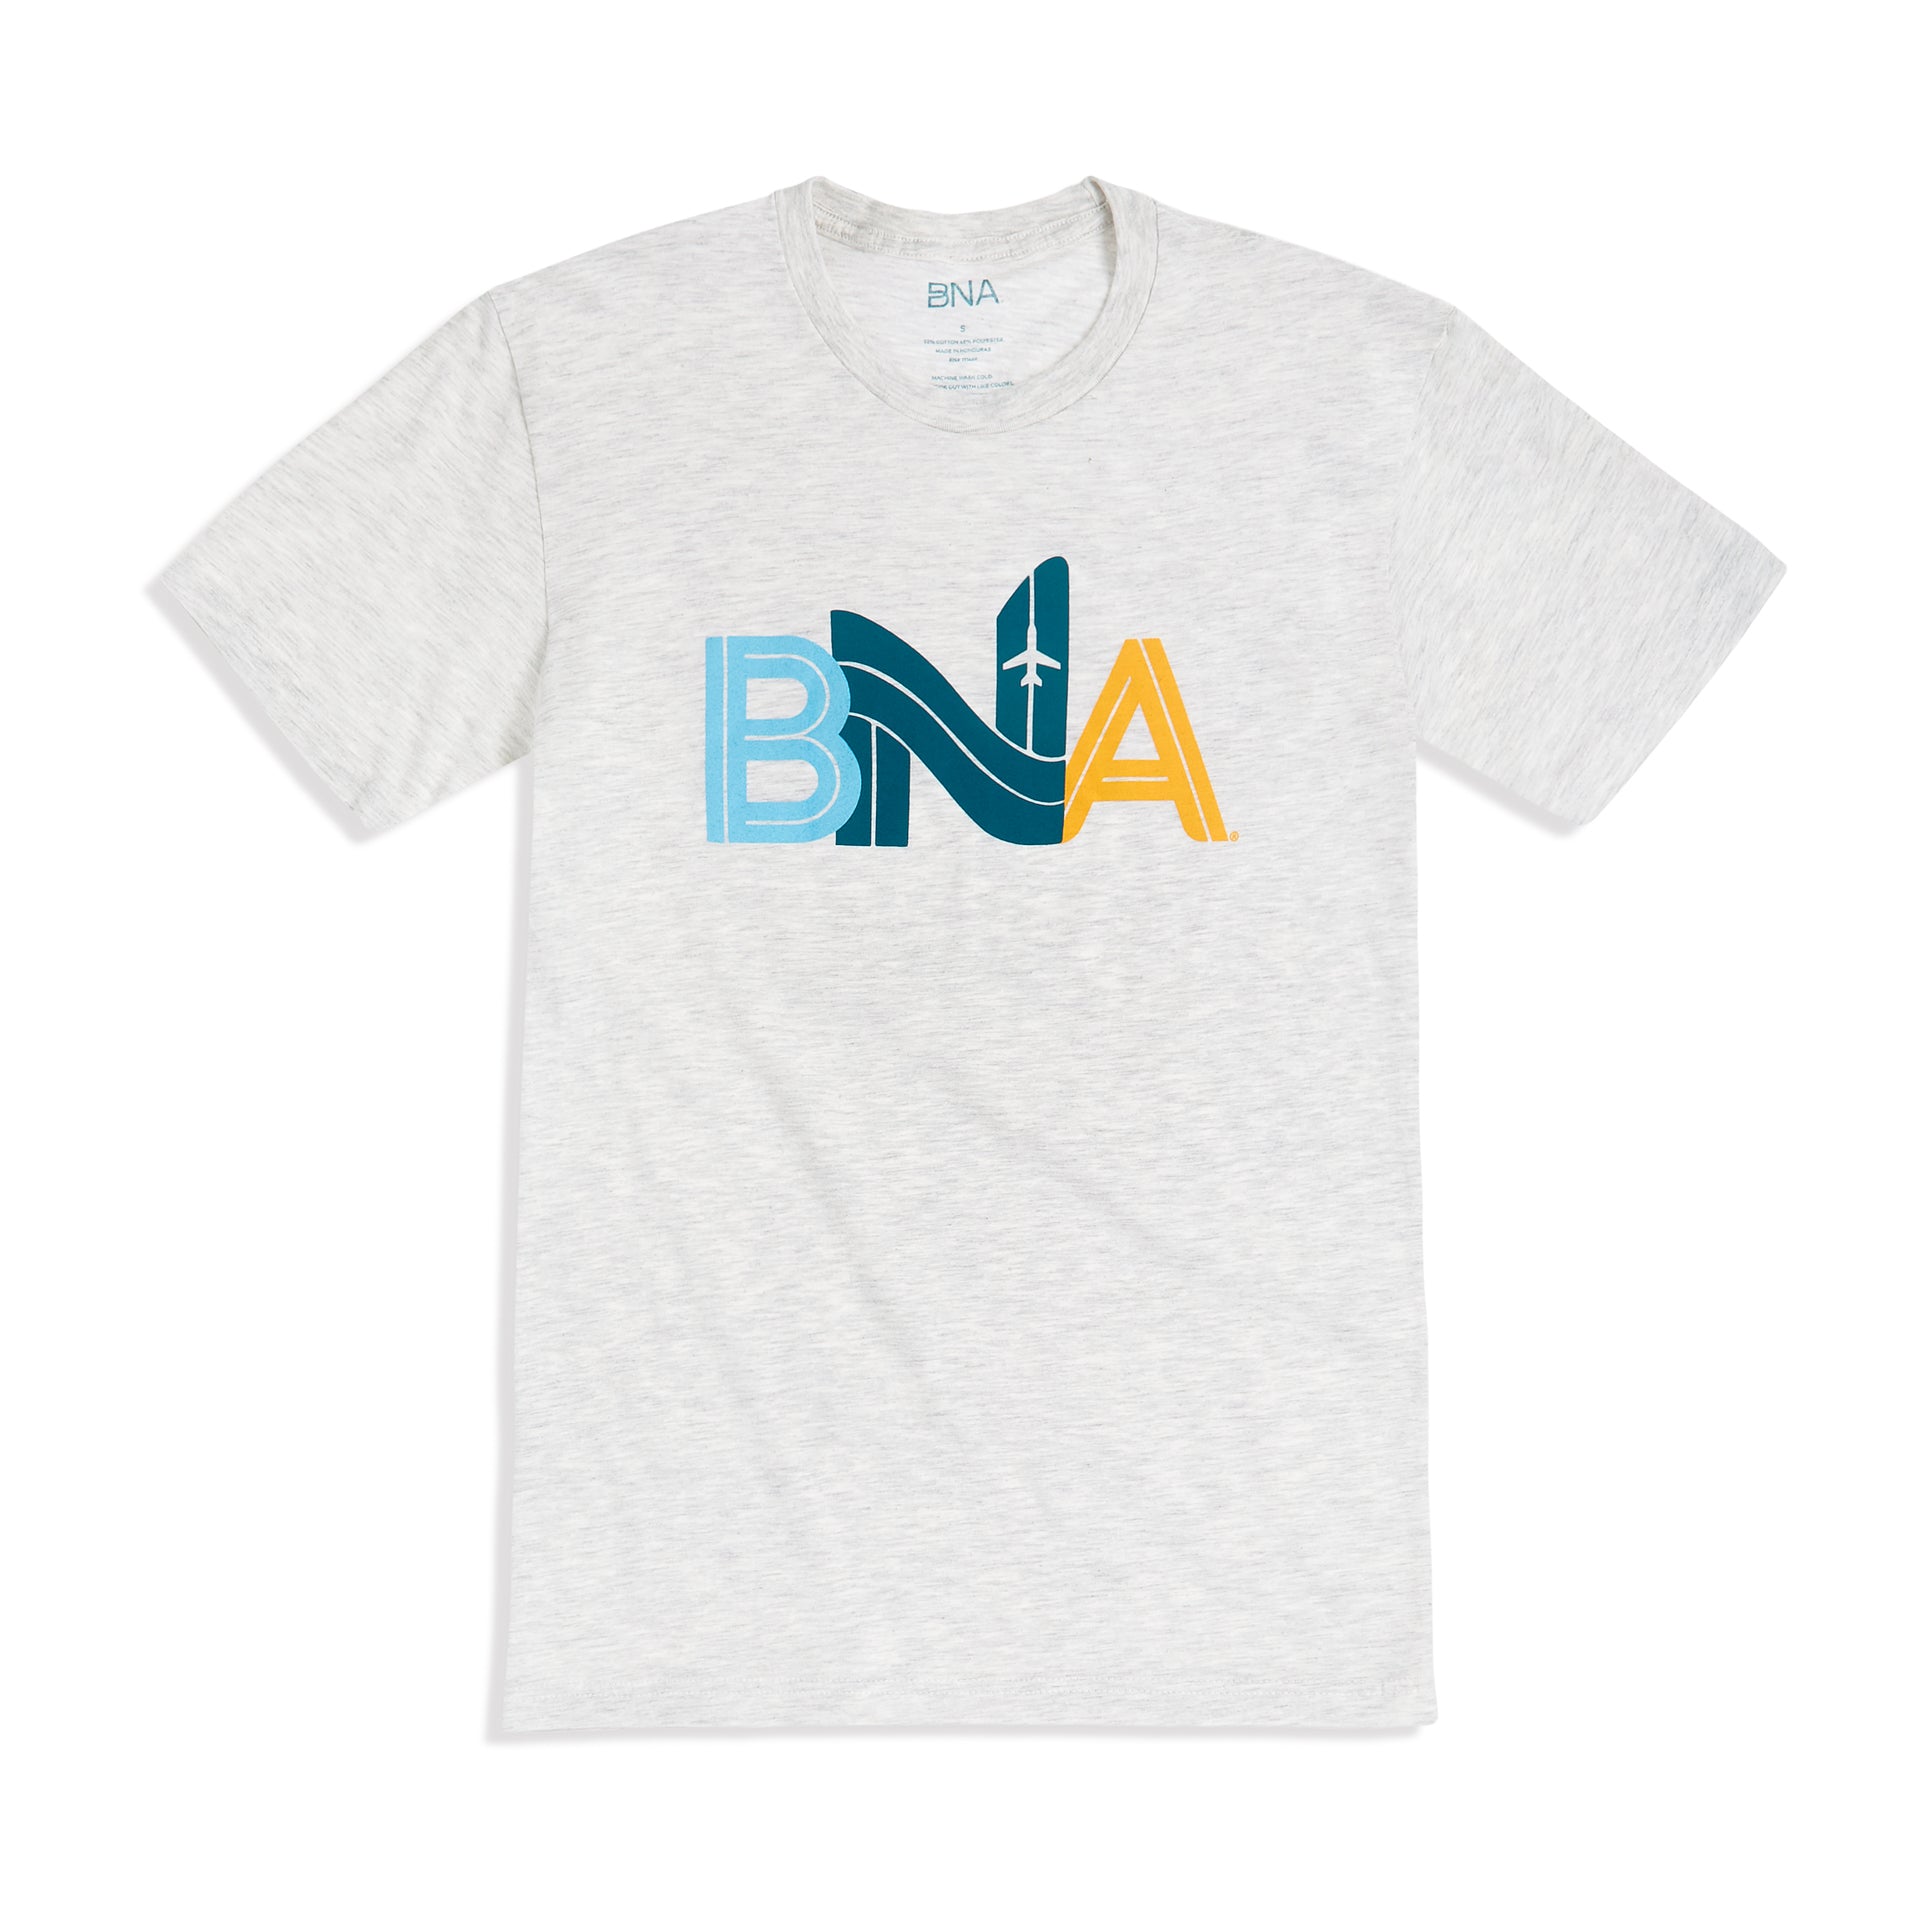 Light gray heather unisex t-shirt featuring a BNA made to appear like airfield runways. An aircraft is viewed on the N. Each letter is a differet color; the B is pale blue, N is a dark teal, and A a sunflower yellow.